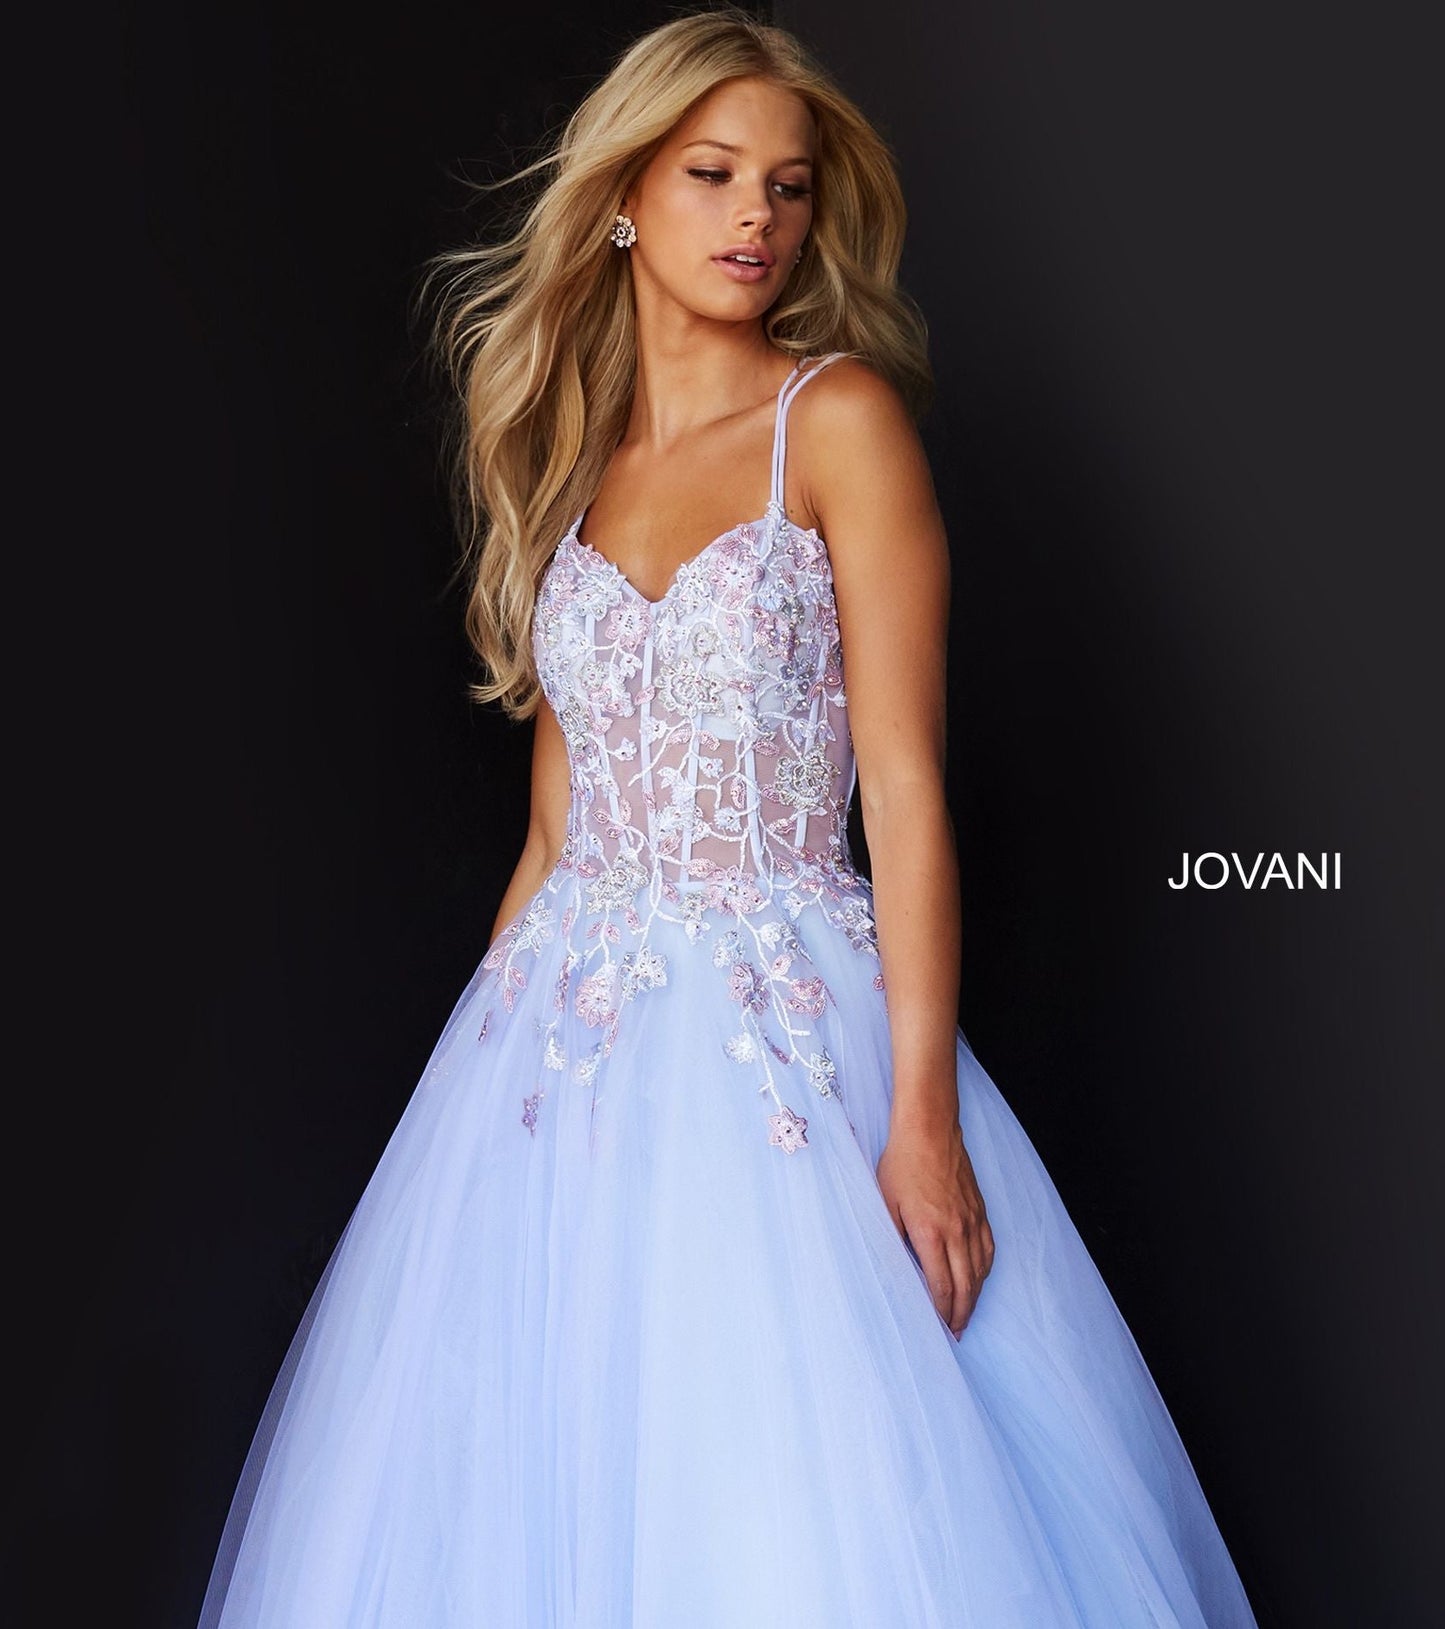 Jovani 06207 Lilac Prom Dress Ballgown v neckline Sheer floral corset bodice and tulle skirt